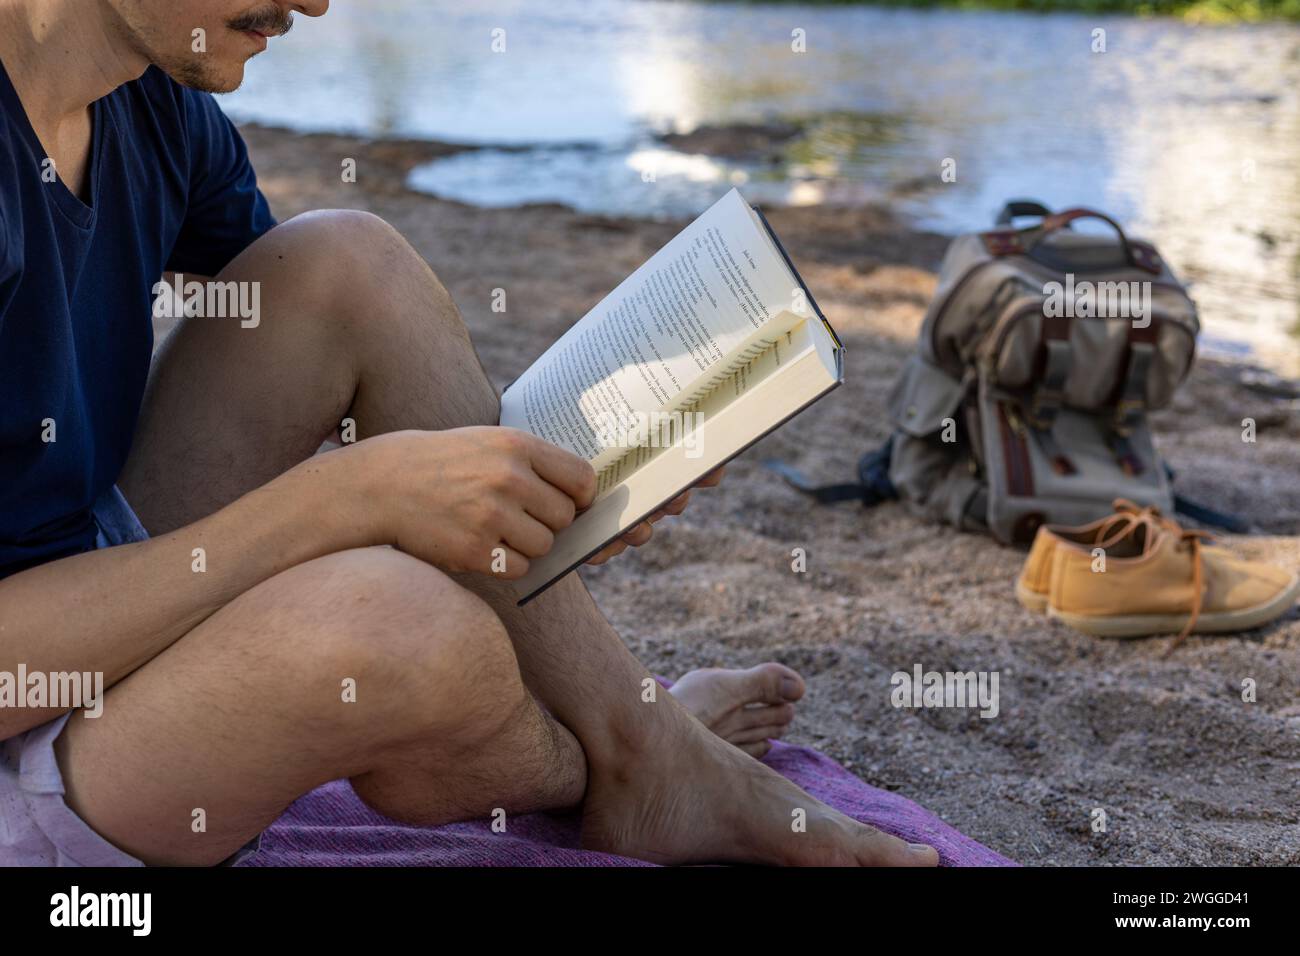 A man seated on the ground engrossed in reading a book placed on his lap. Stock Photo